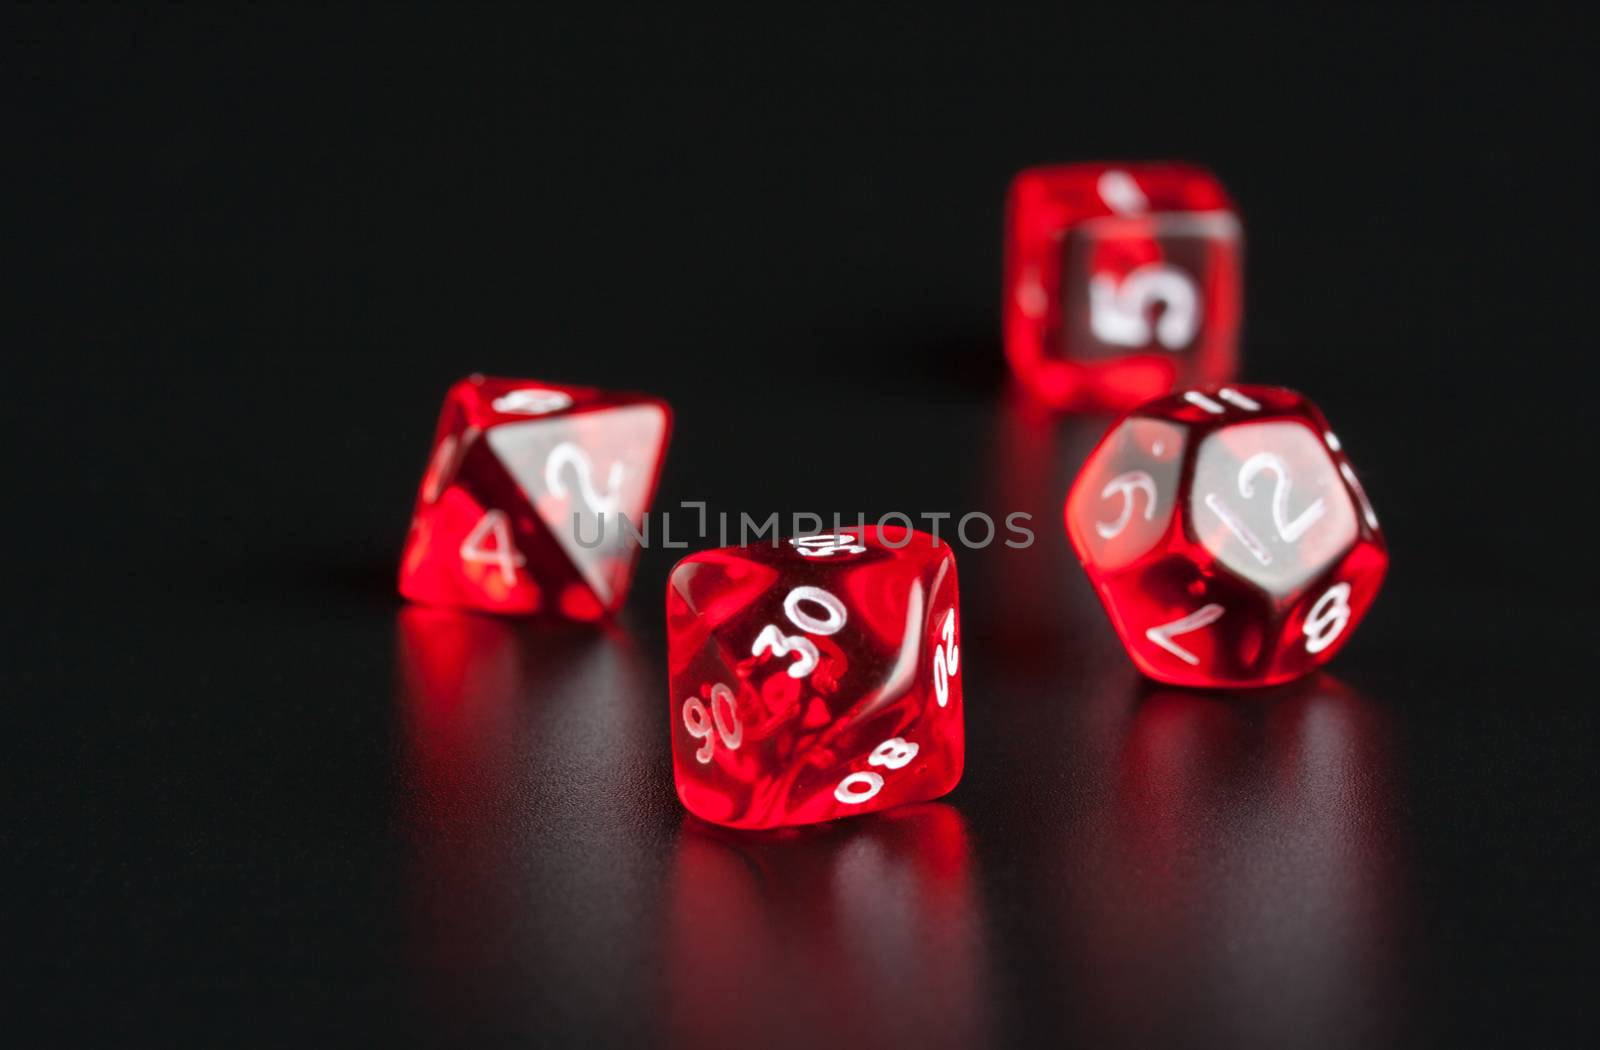 variety of polyhedral dice by lanalanglois